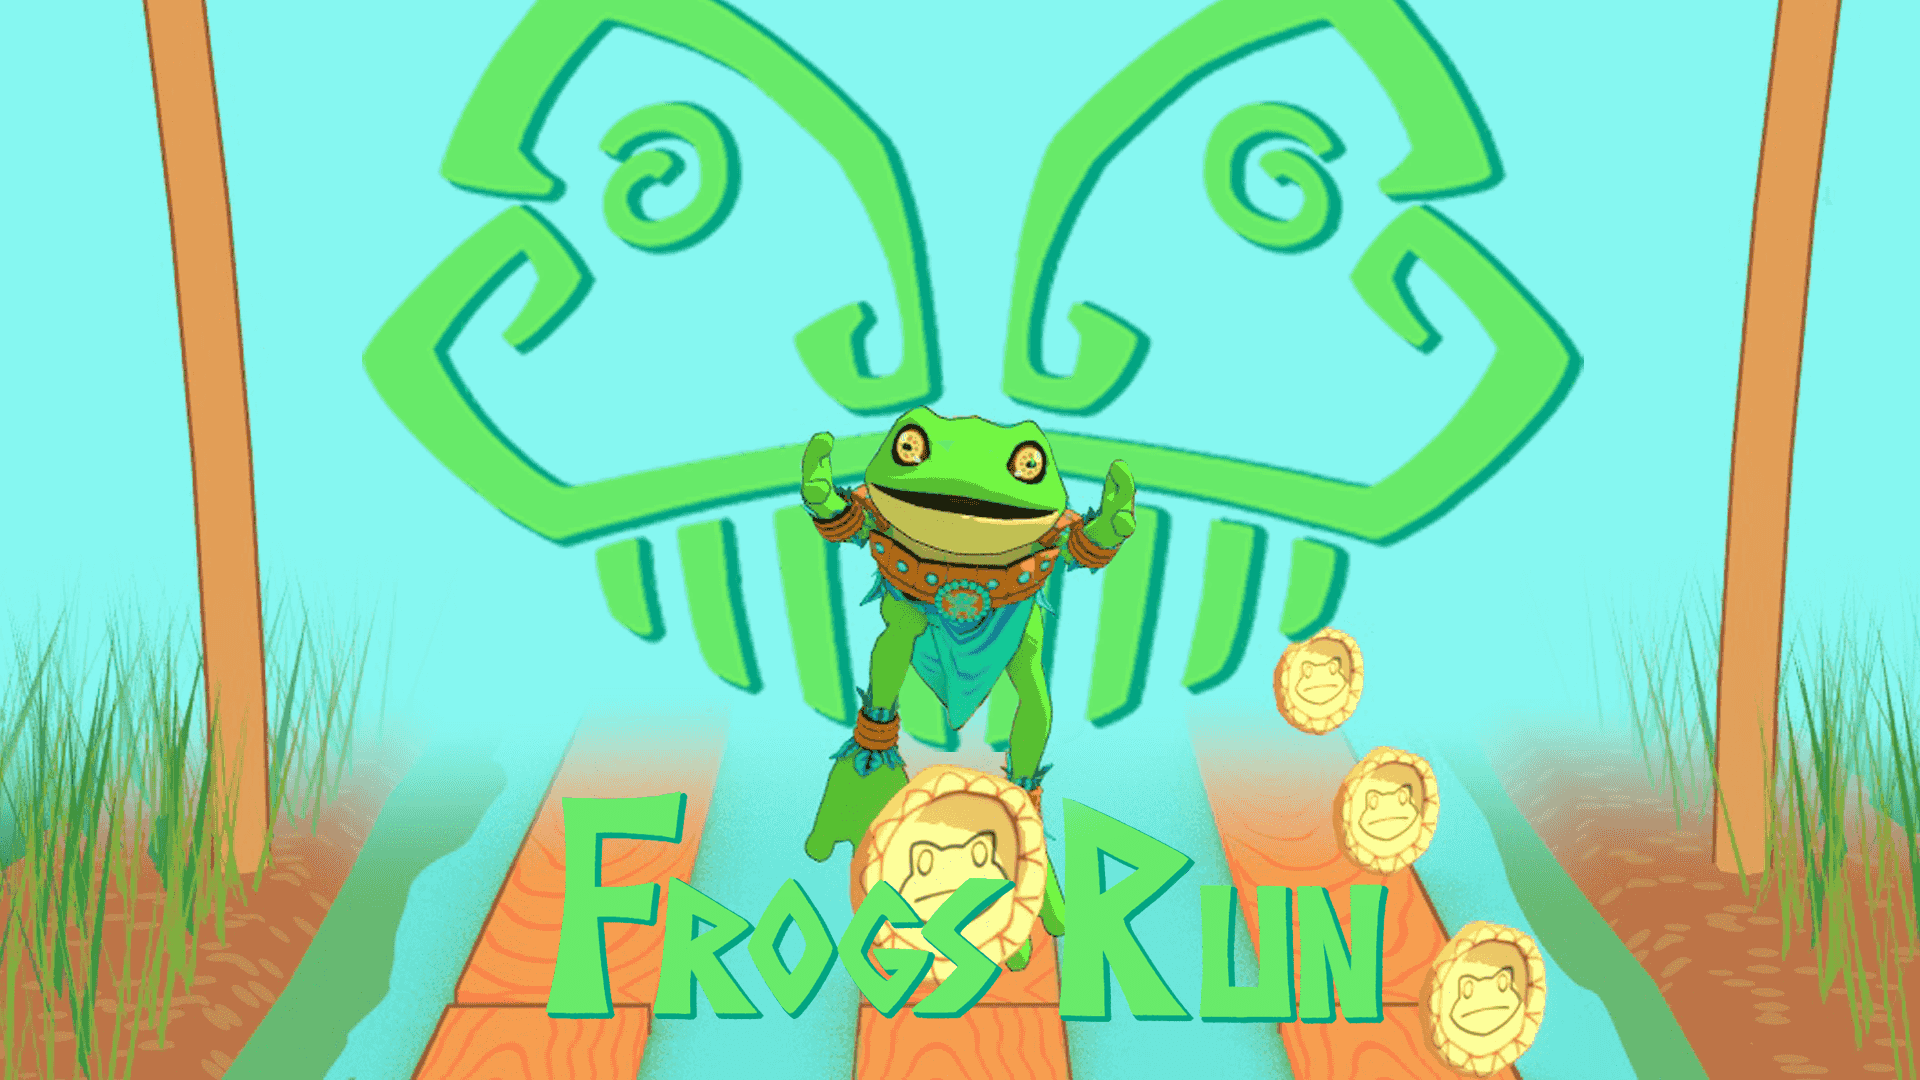 Frogs Run: Free-to-Play NFT Runner Game on BNB Chain - Play To Earn Games